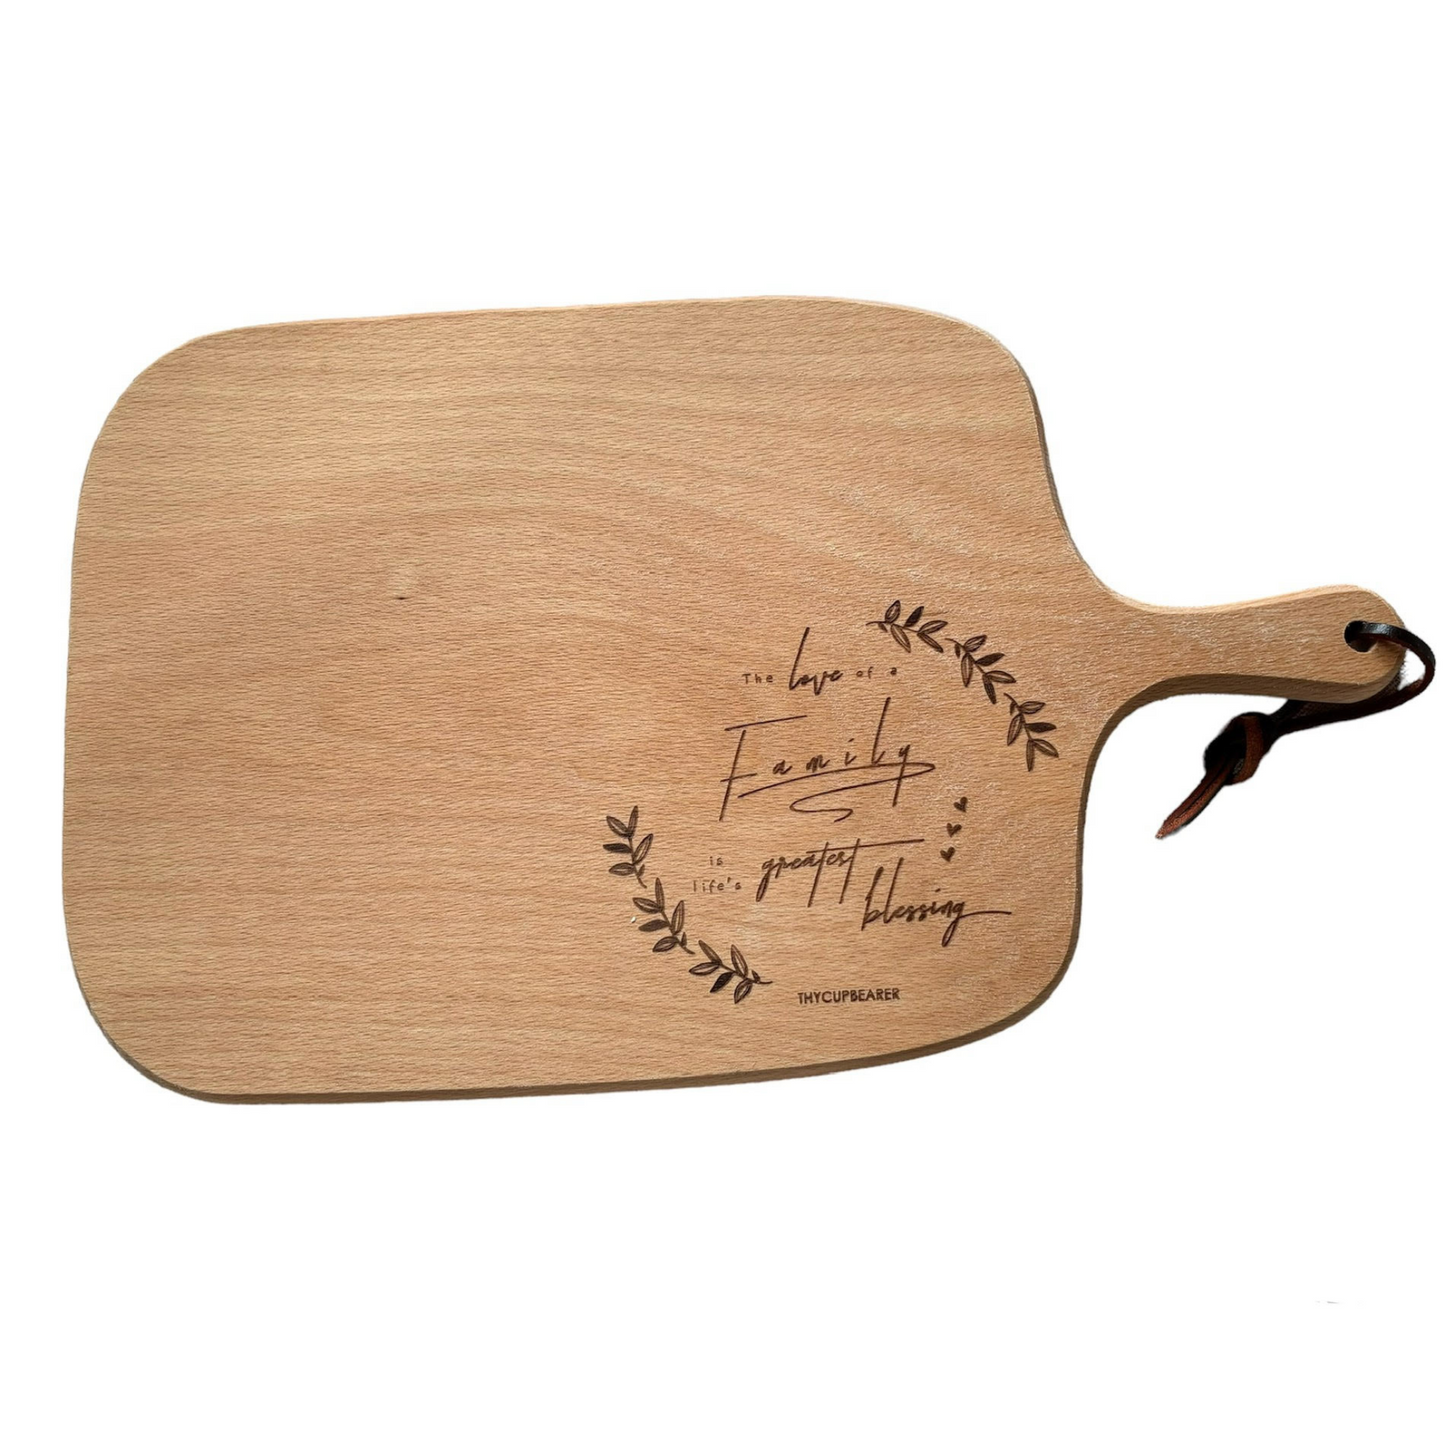 Wooden Cheese Board - Life's Greatest Blessing